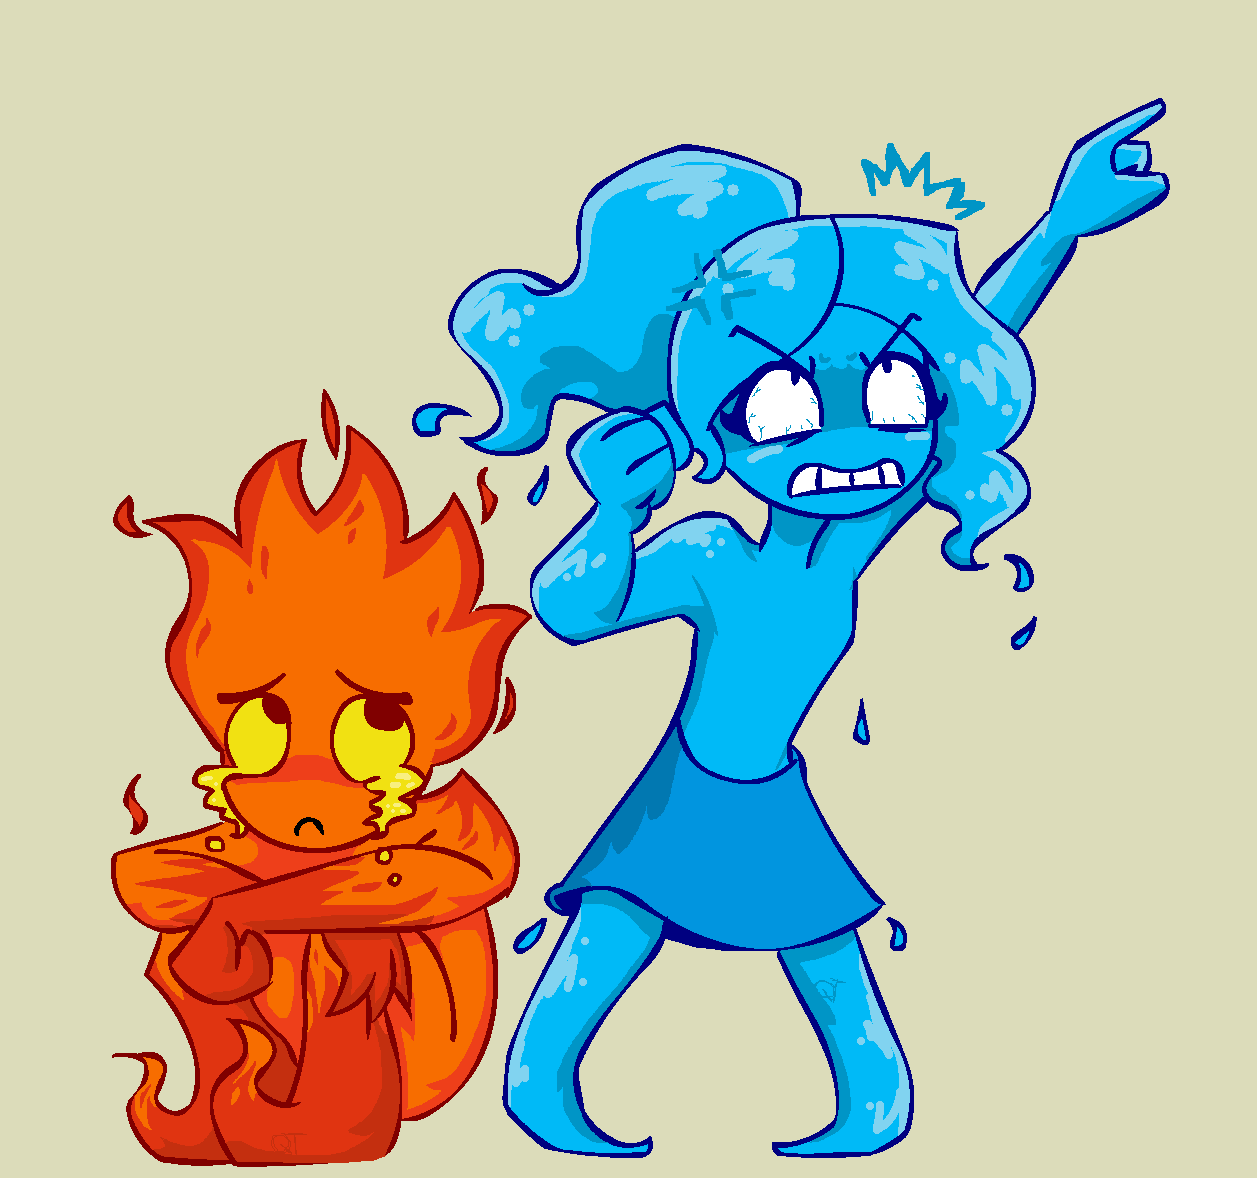 qt on X: seeing the new pixar movie trailer is tempting me to make a  fireboy and watergirl series with them being just best FRIENDS working  together with fireboy being powerful but